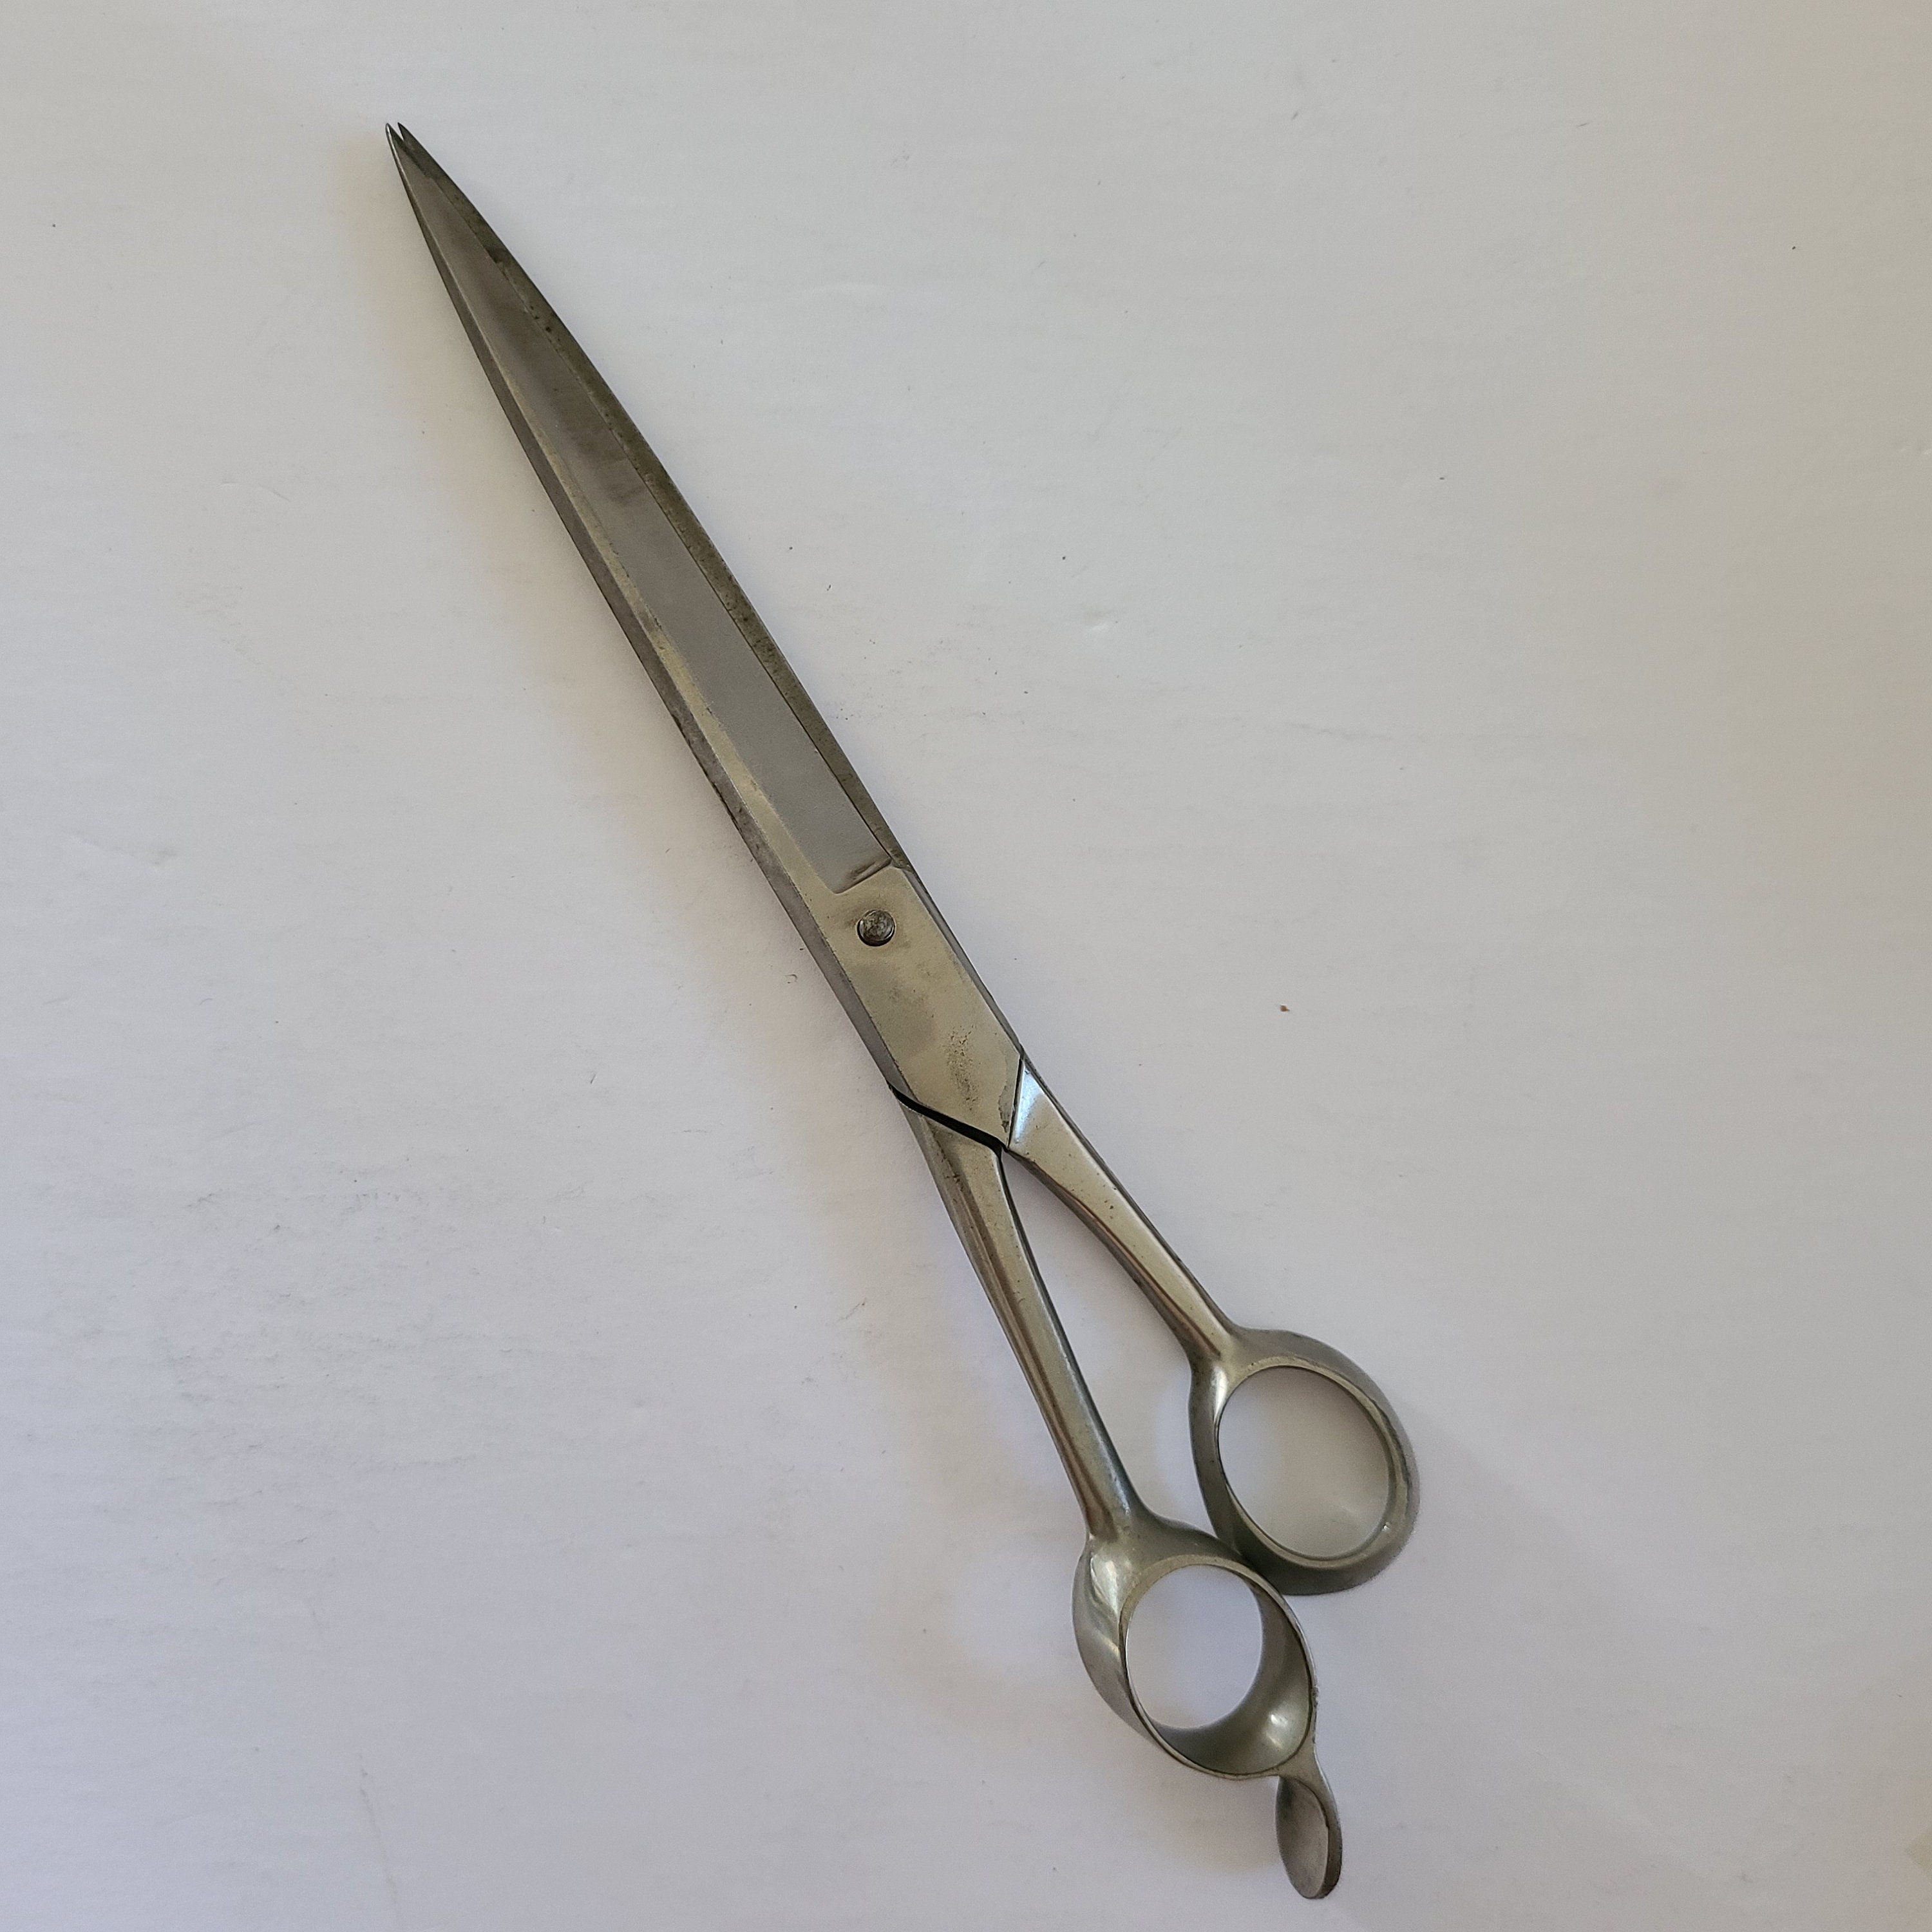 Belmont 8 Utility Scissors Shears / Straight Trimmers 576/8 Italy 